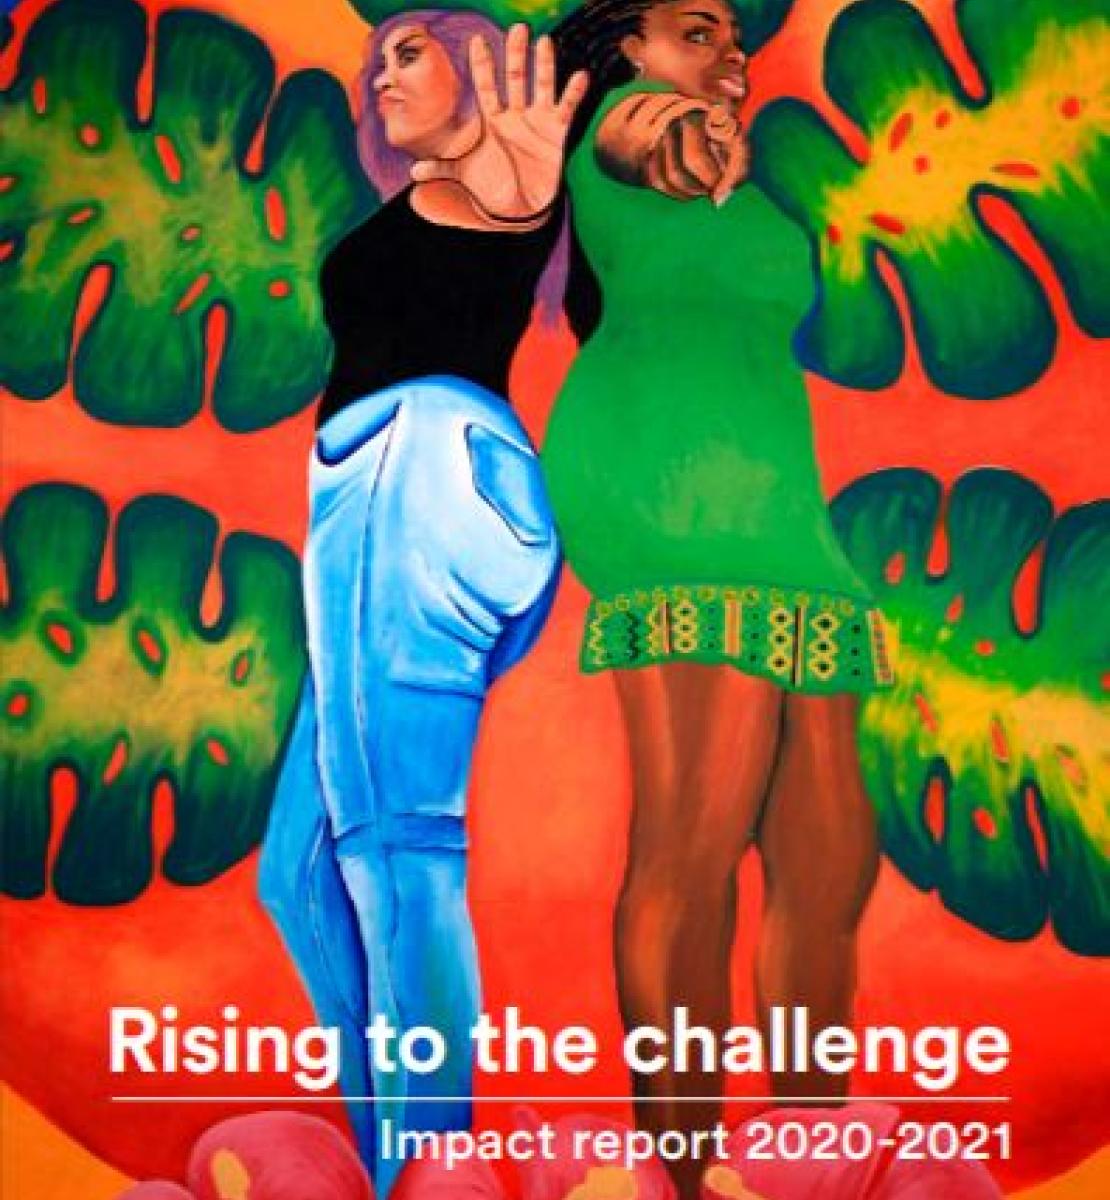 A lovely graphic illustration of two women standing back-to-back as they stretch out their palms towards the front, with a colourful background.